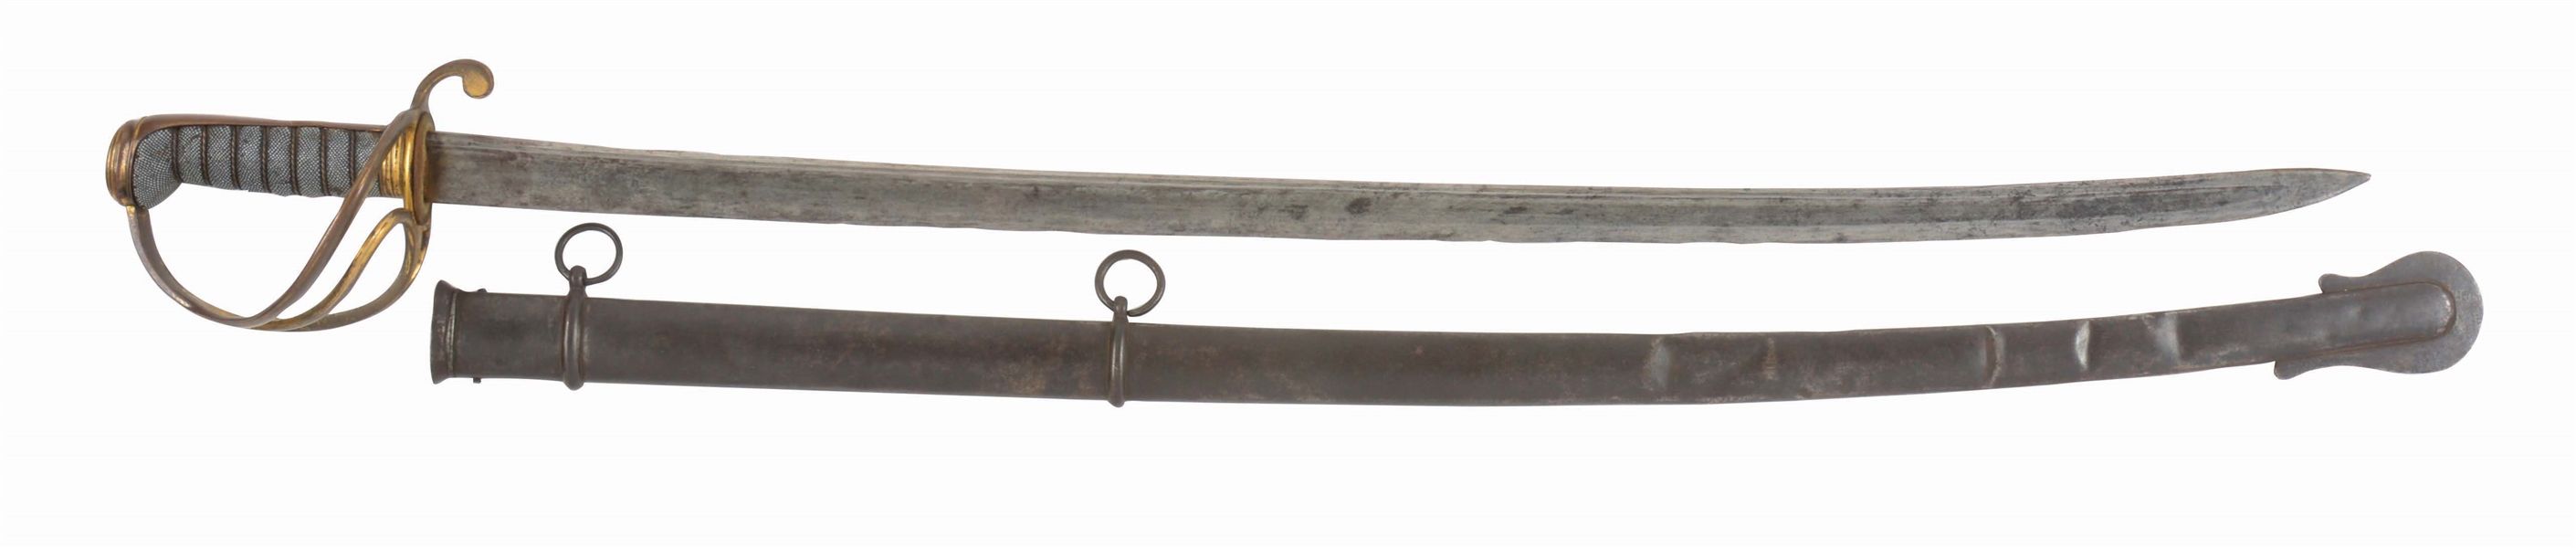 SCARCE U.S. MODEL 1833 DRAGOON OFFICERS SABER WITH SCABBARD.